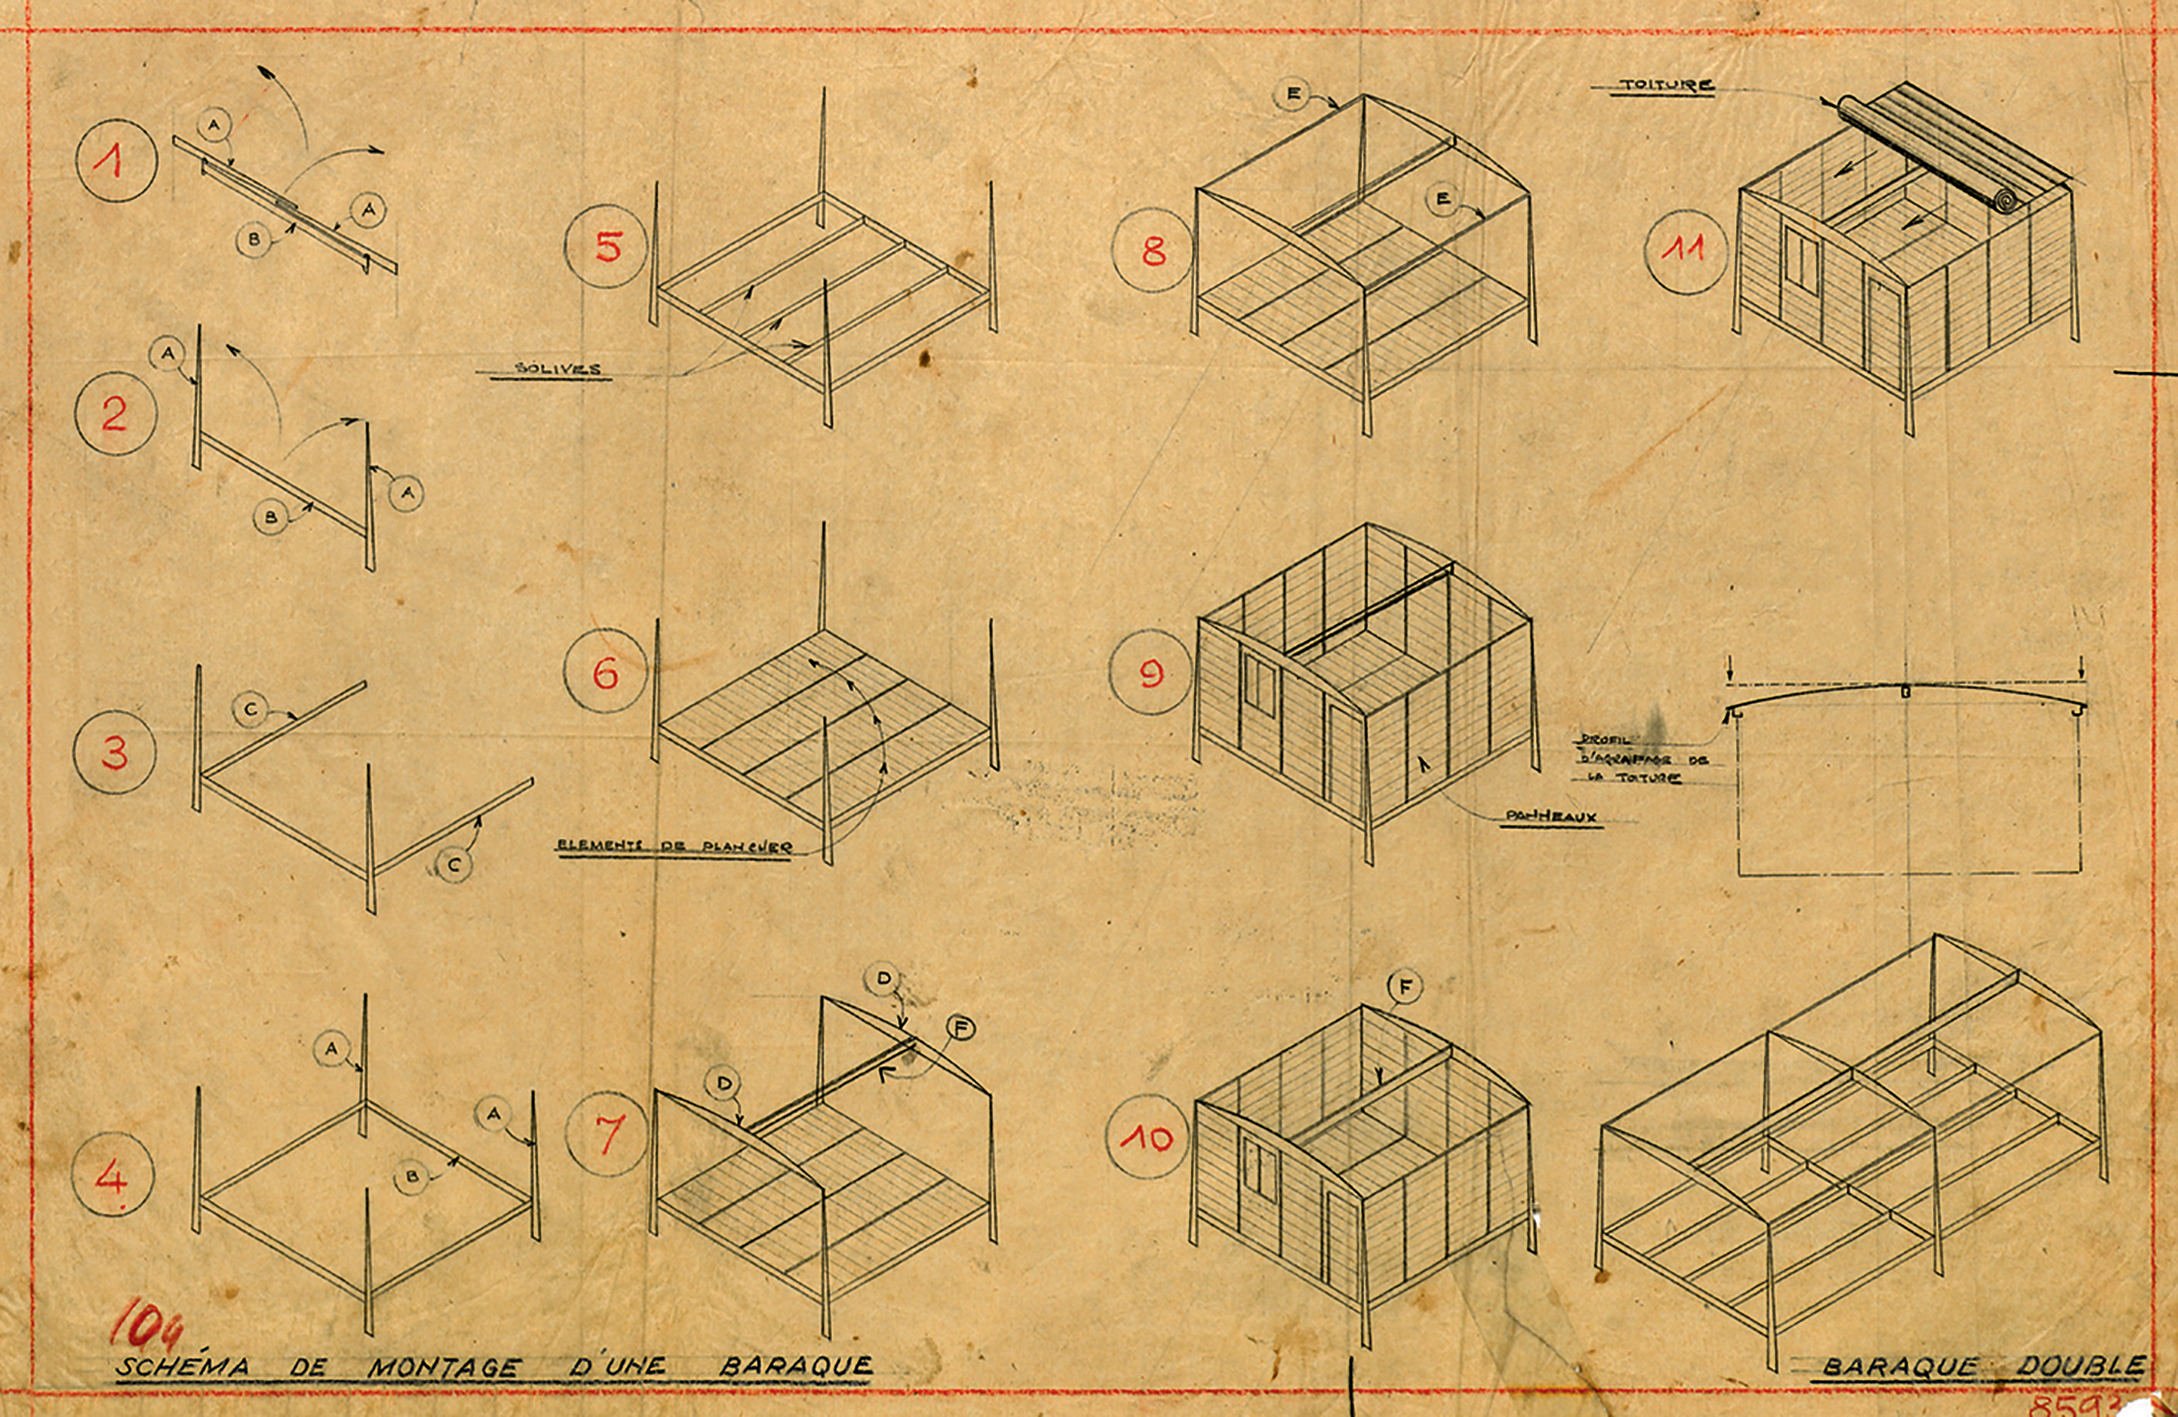 Ateliers Jean Prouvé “Assembly diagram for a shelter; double shelter”. Plan no. 8593, February 1940.